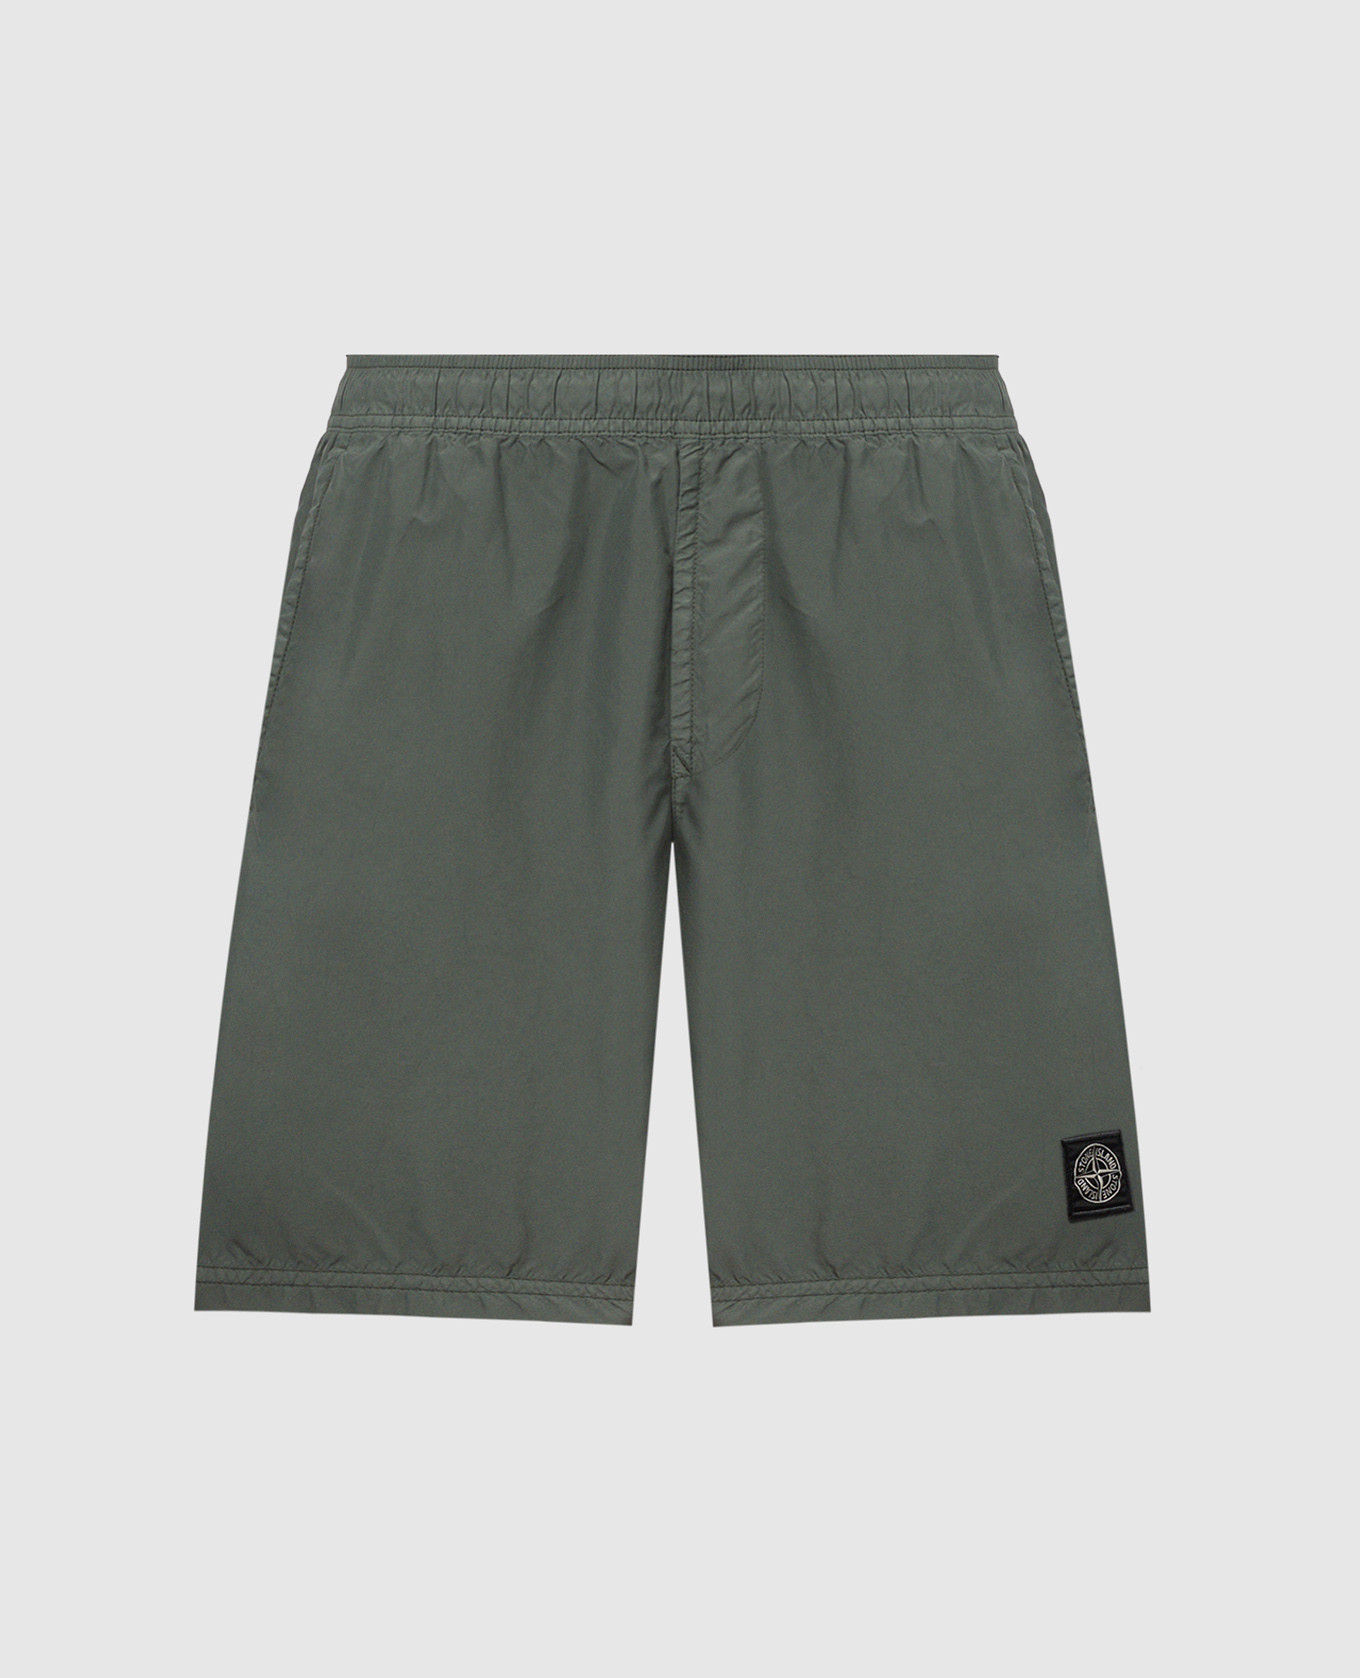 Green shorts with logo